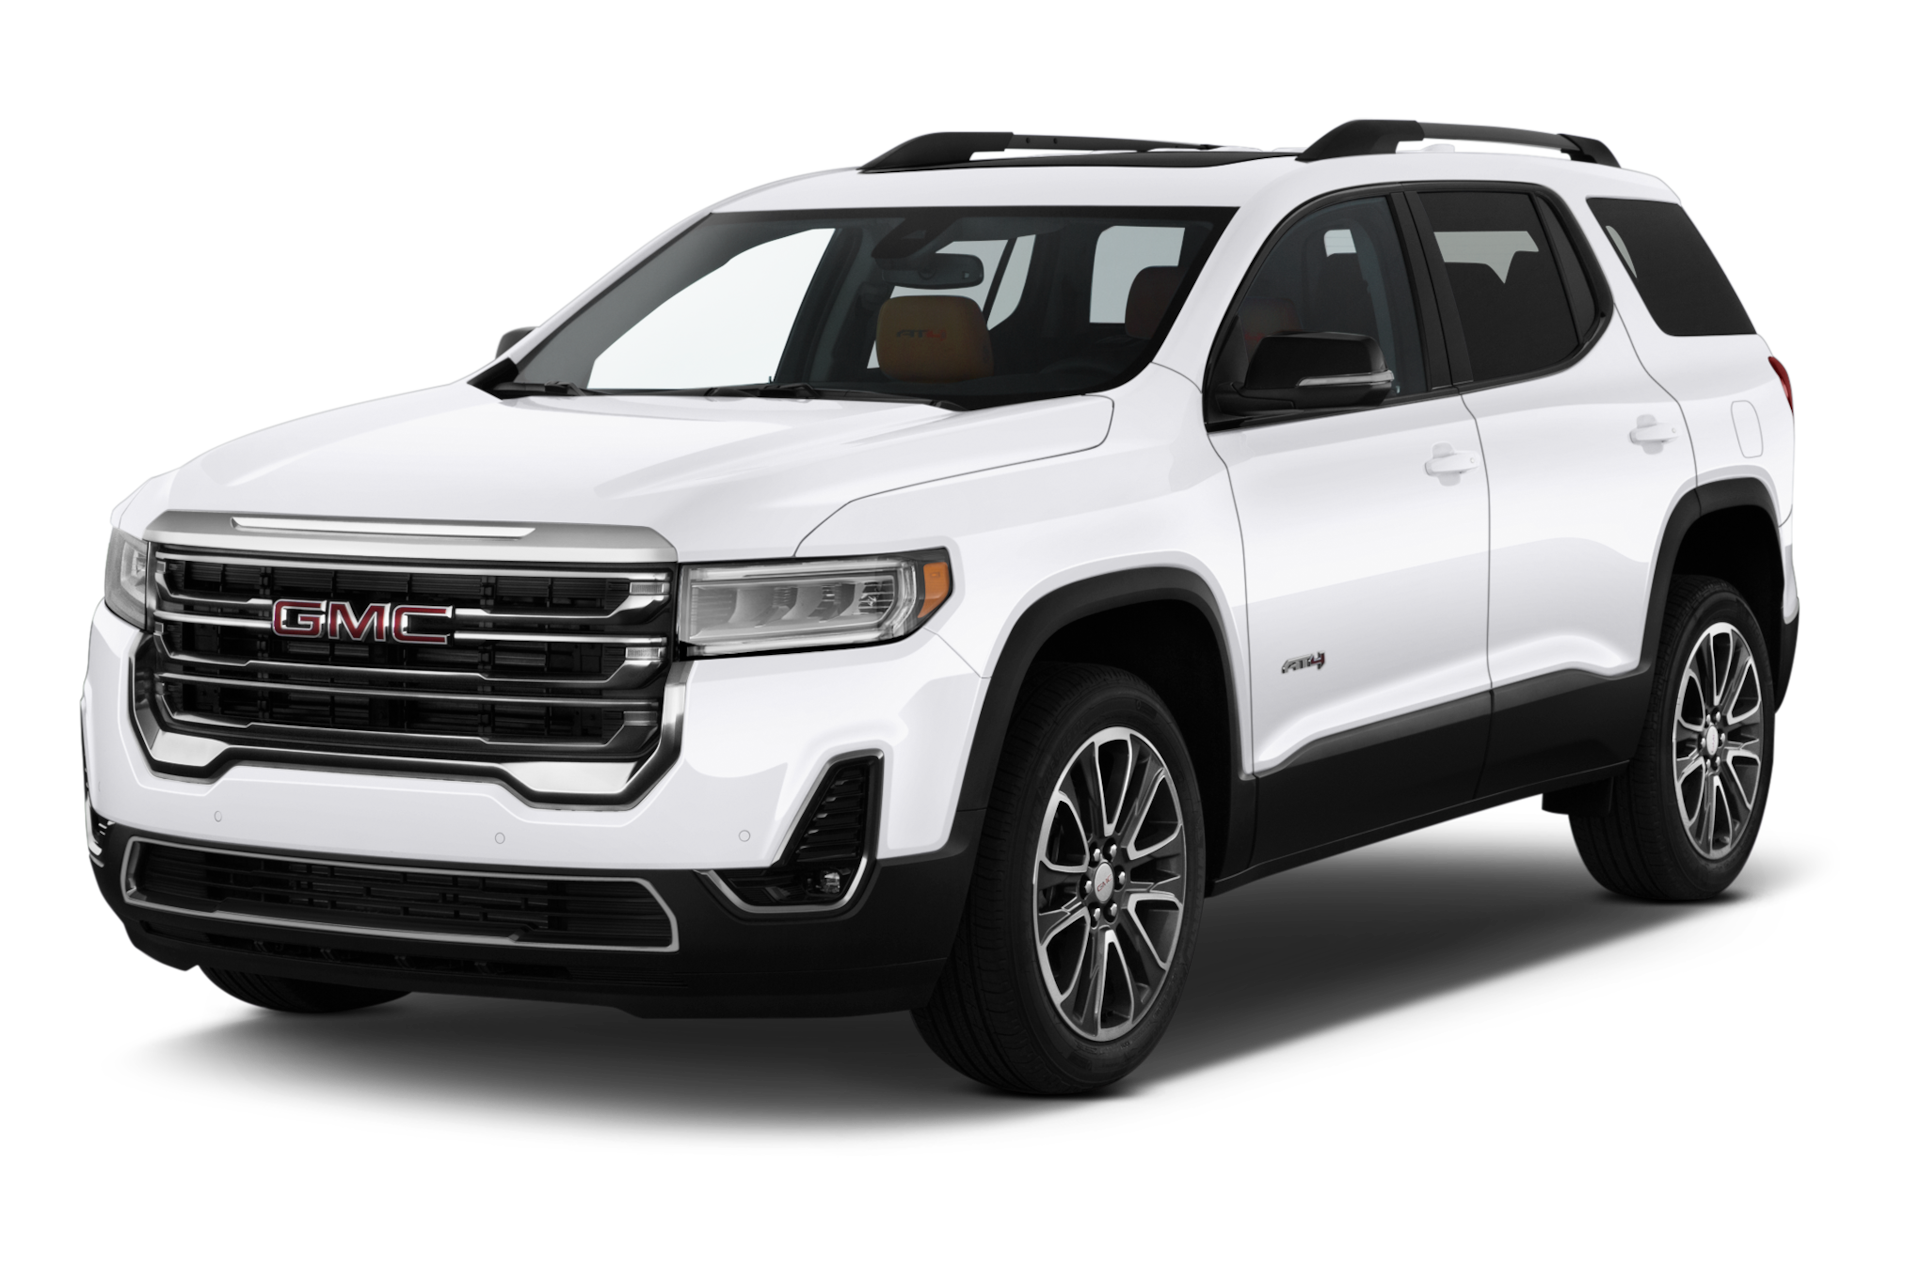 2020 GMC Acadia Prices, Reviews, and Photos - MotorTrend